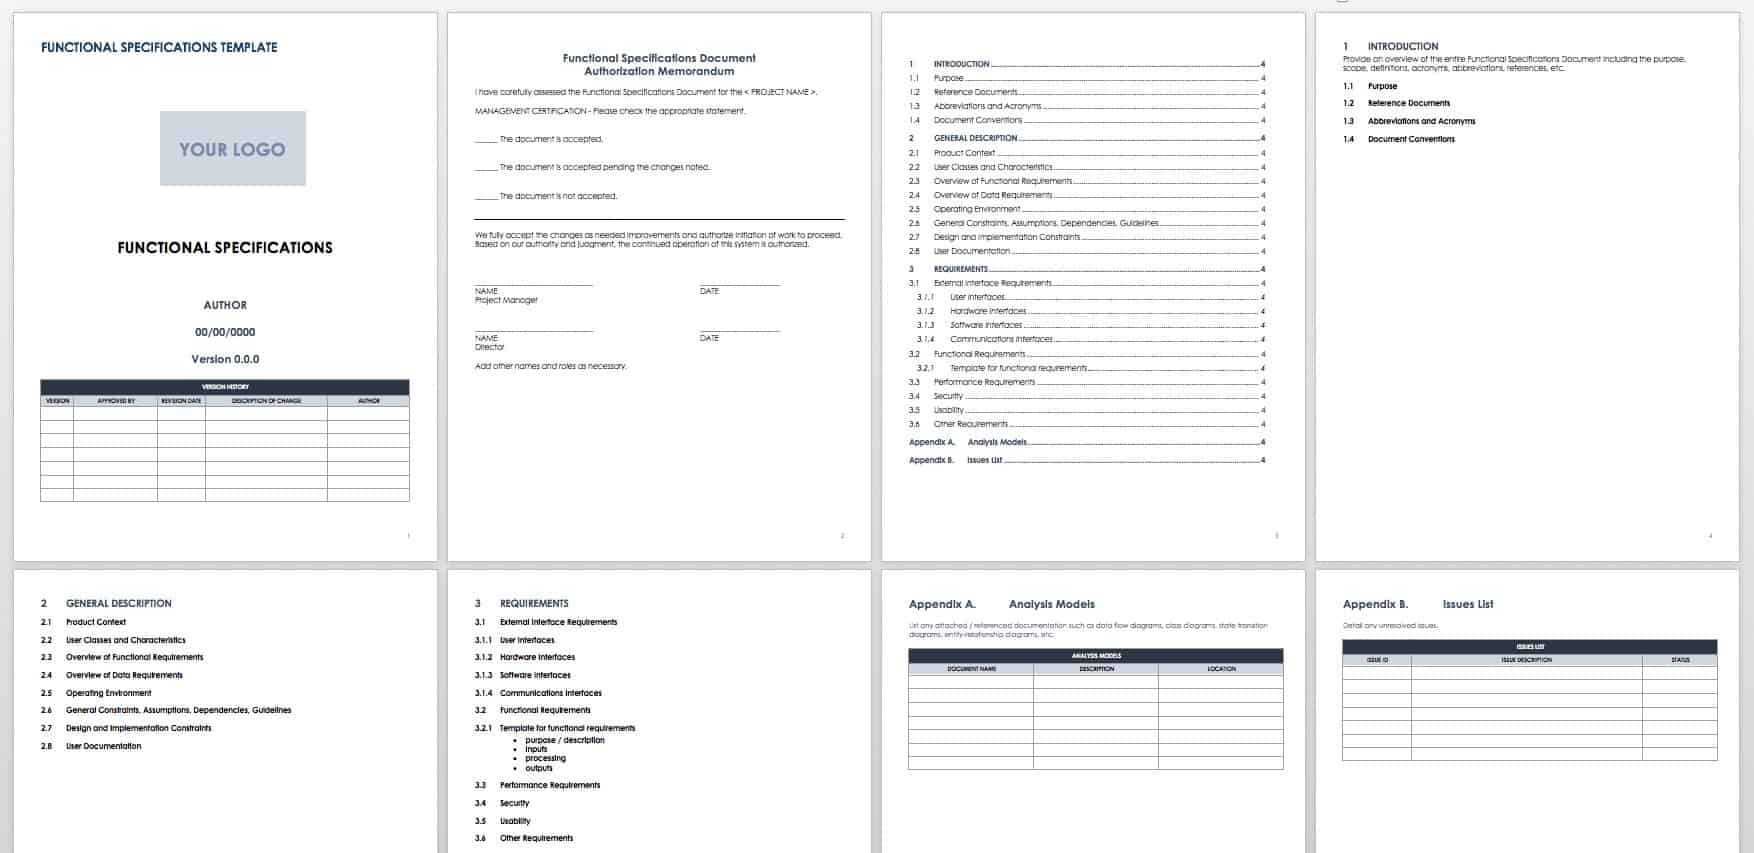 Free Functional Specification Templates | Smartsheet Throughout Report Specification Template